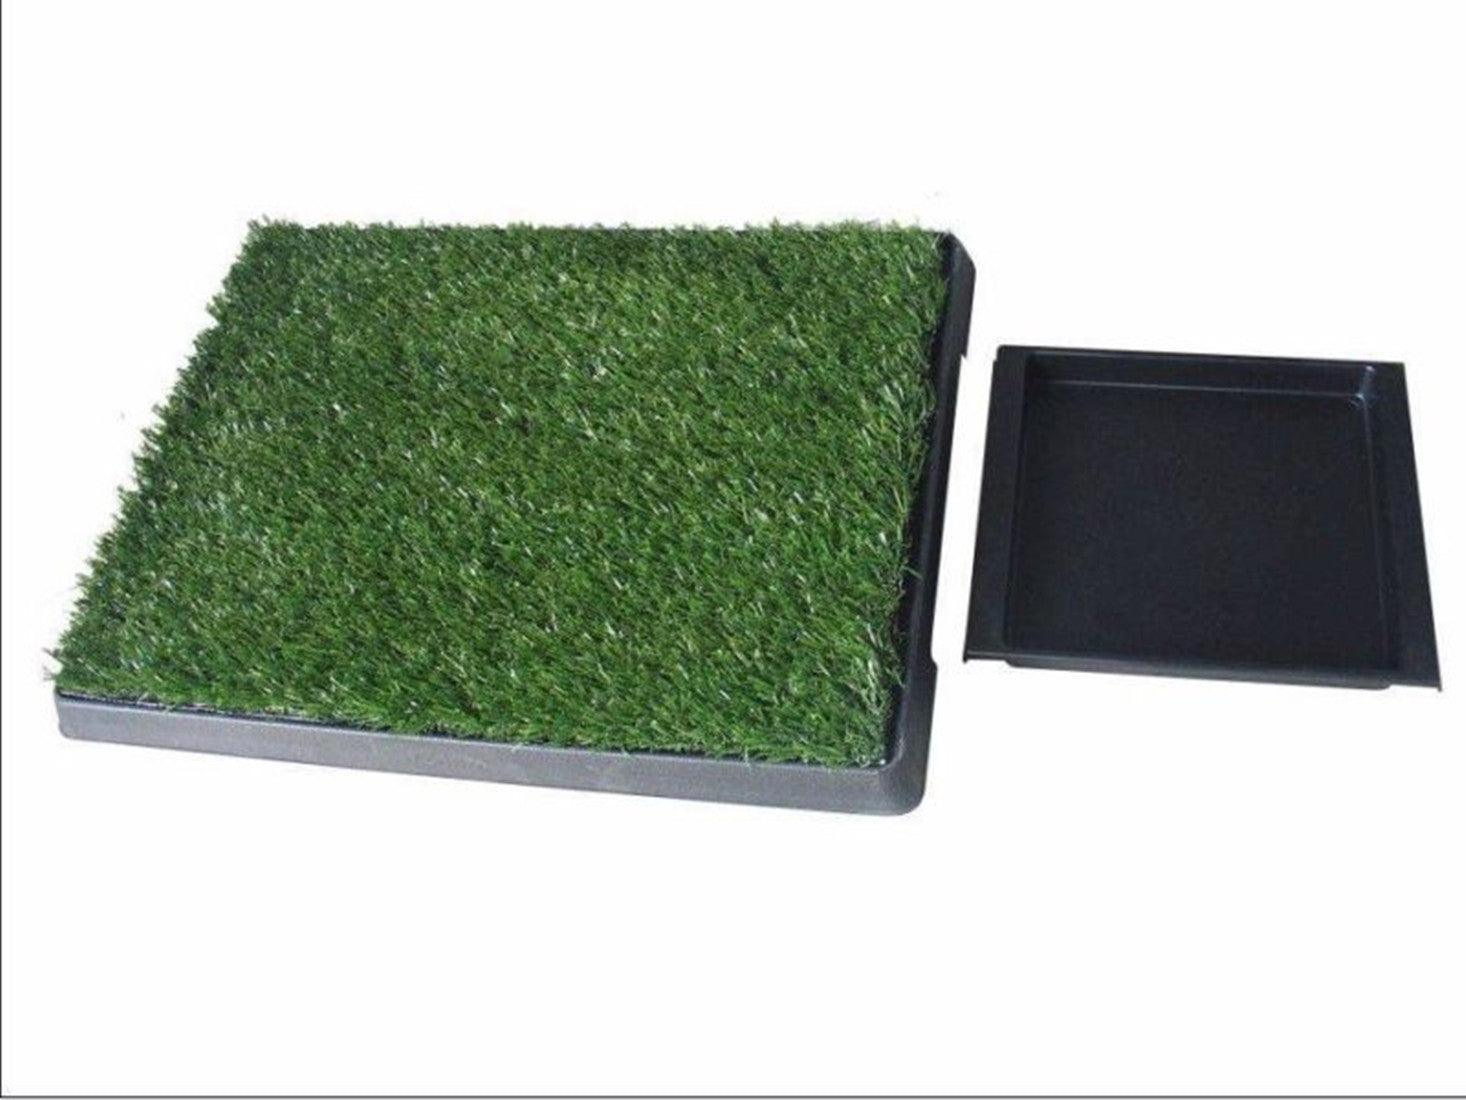 Indoor Dog Toilet Grass Potty Training Mat Loo Pad pad with 3 grass